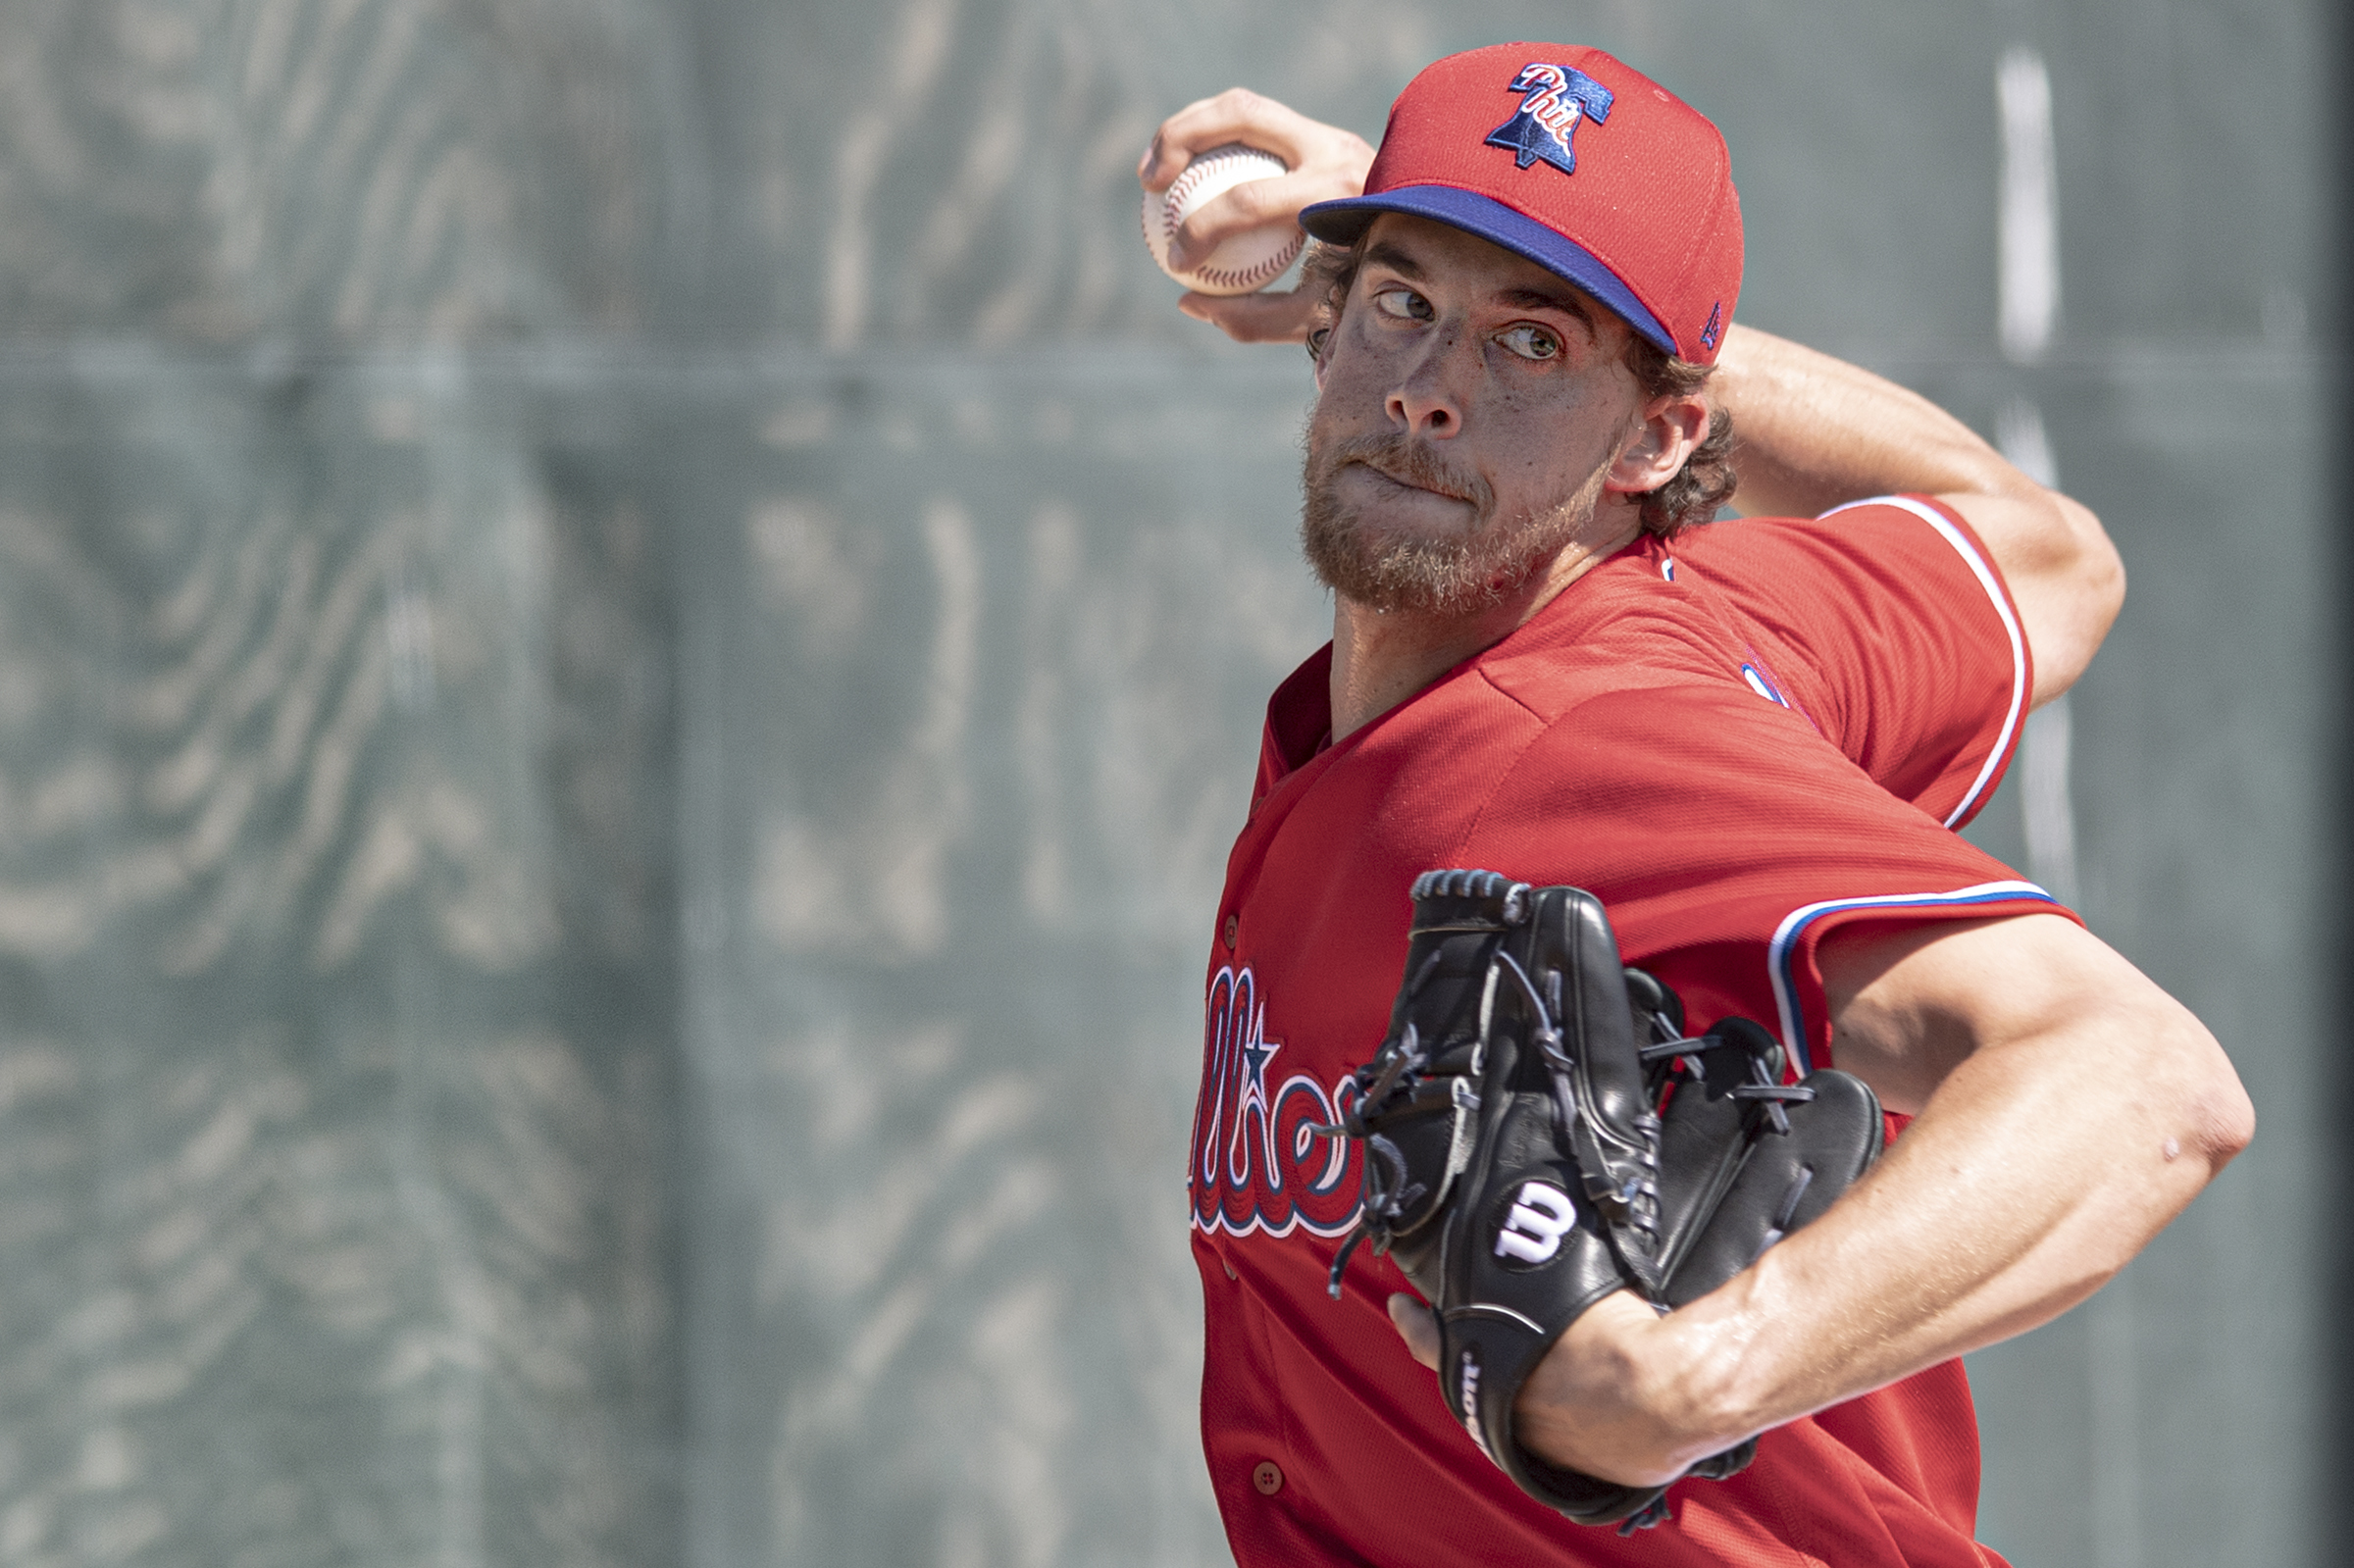 Inside the training routine that makes the Phillies' Aaron Nola